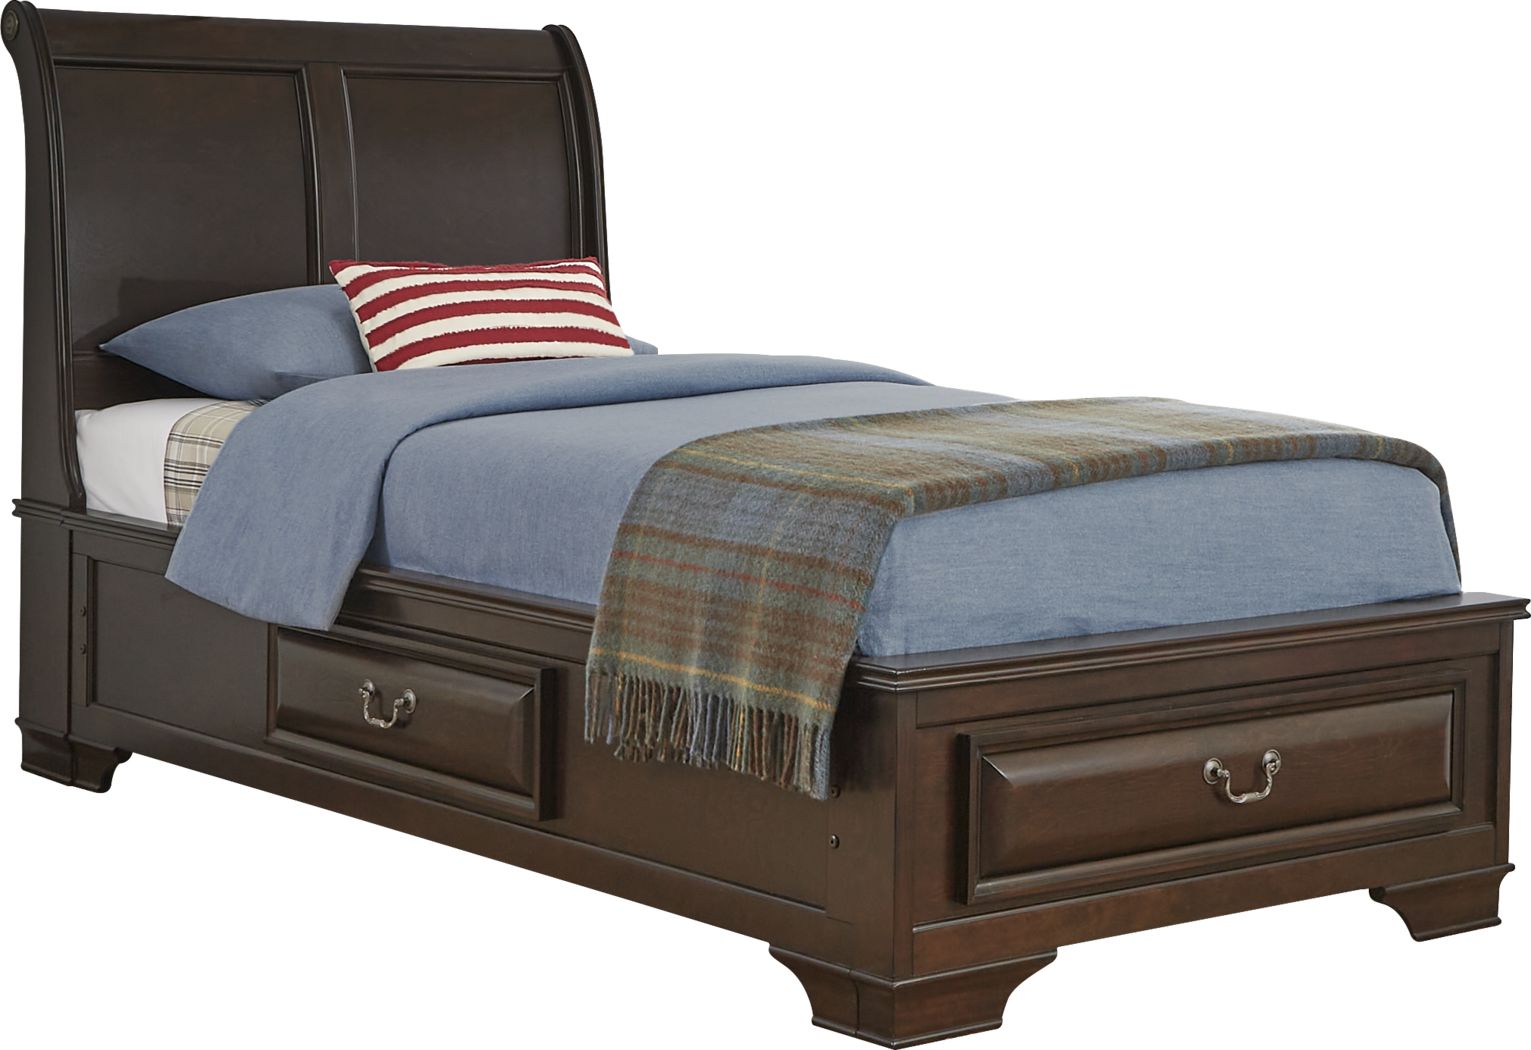 Cherry Twin Beds Bed, Cherry Wood Twin Bed Frame